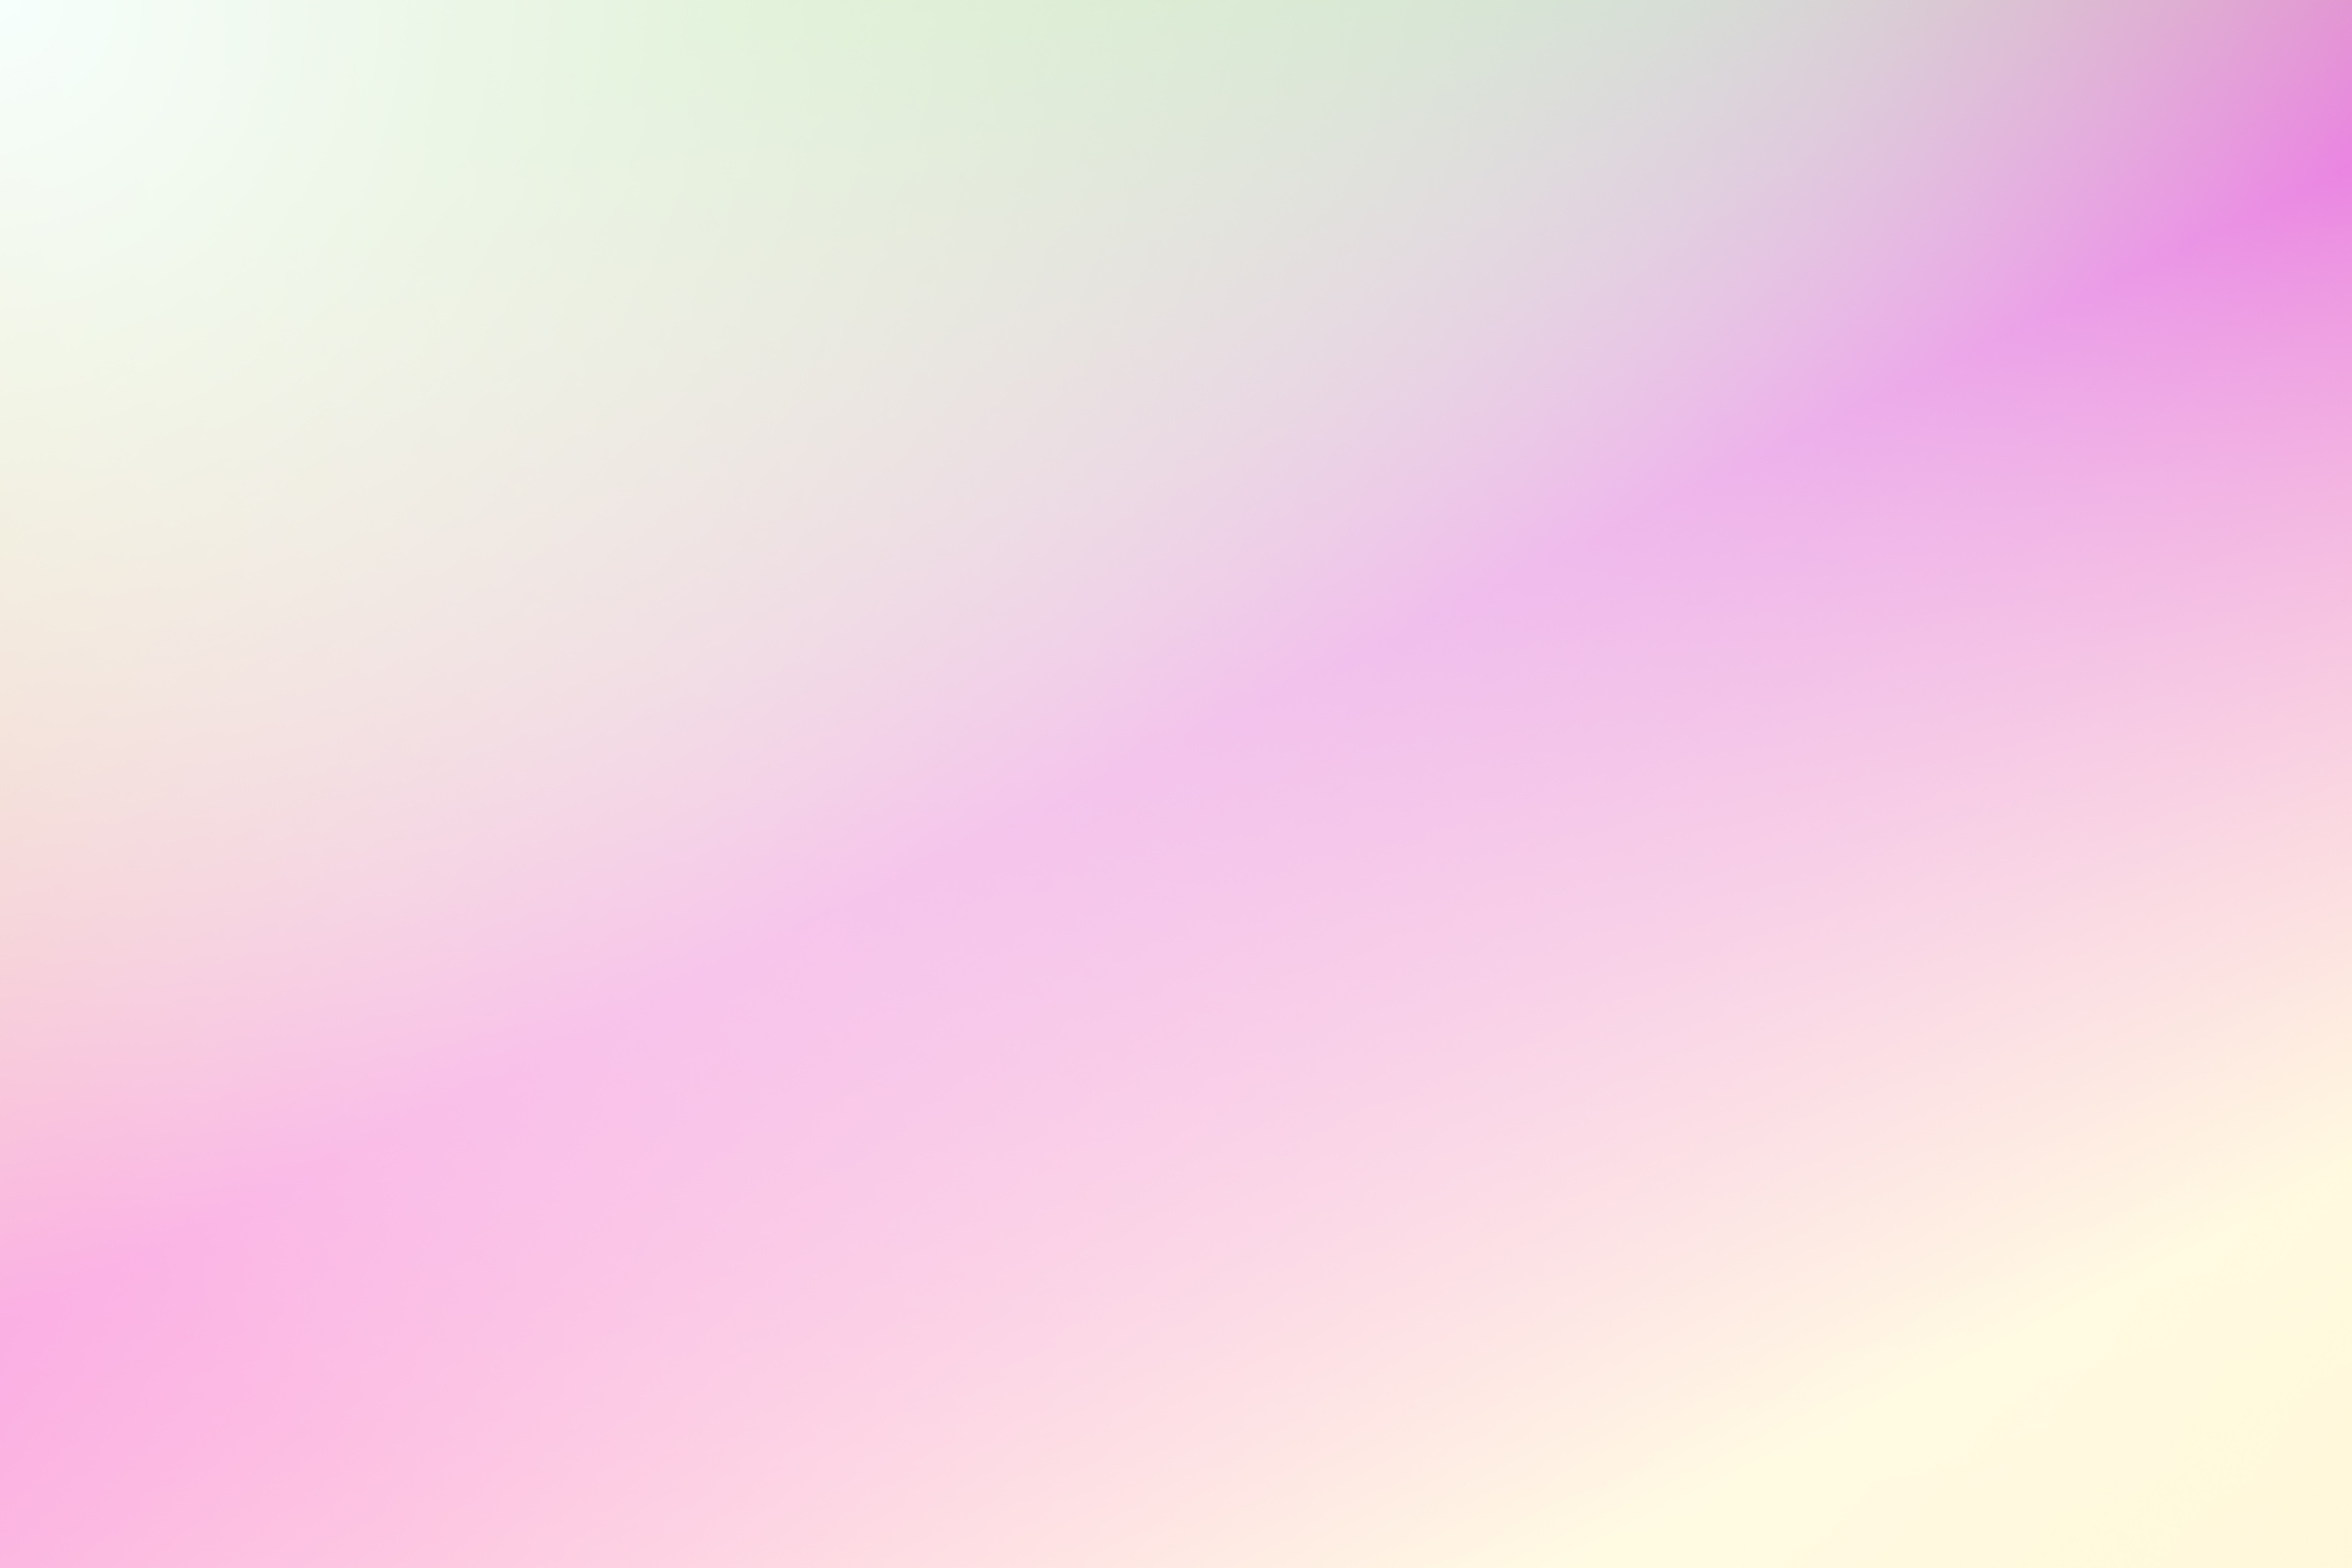 Soft multicolored lights on gradient background